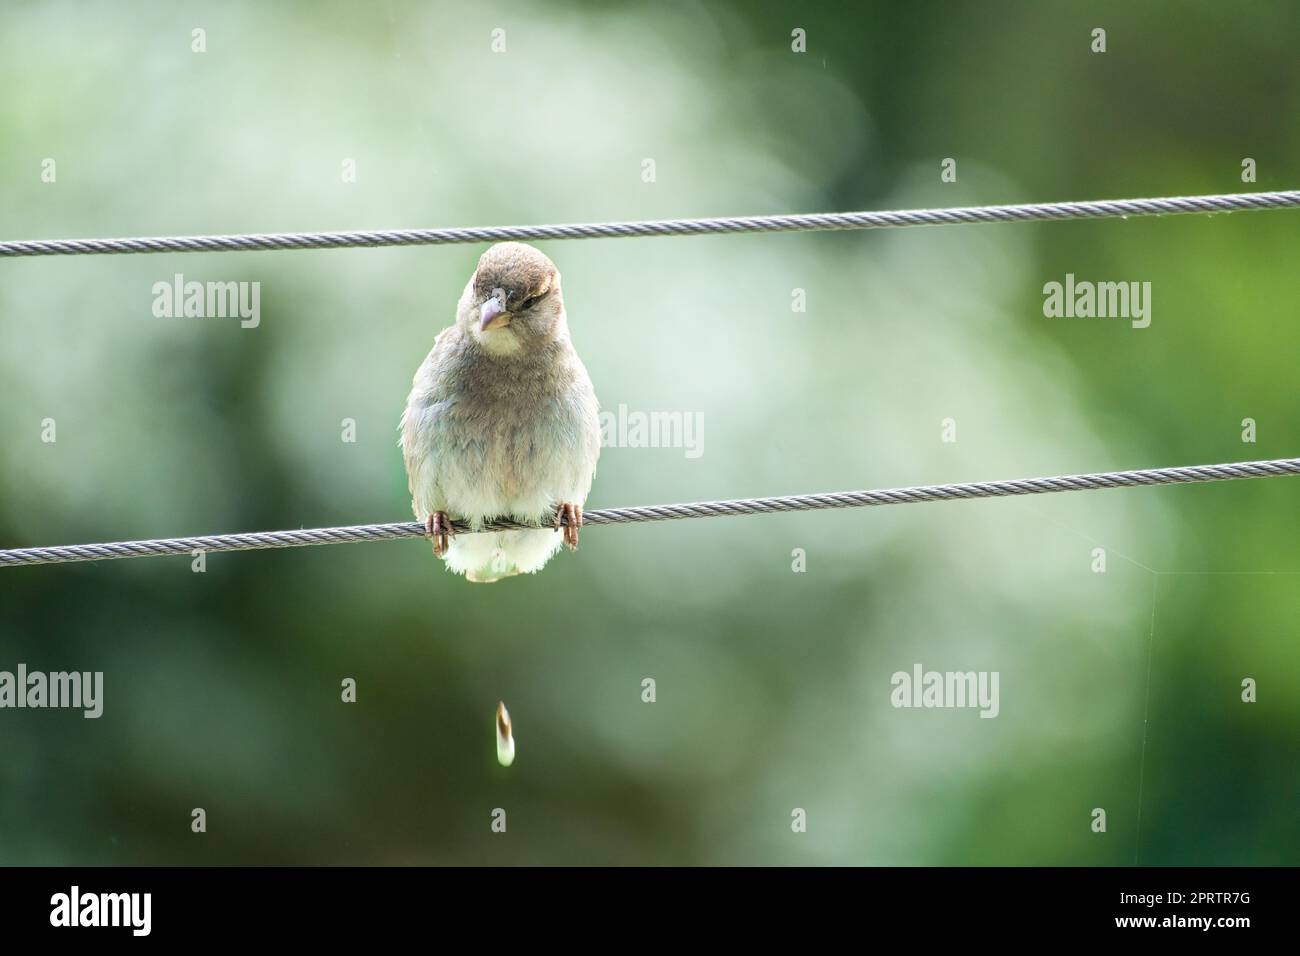 brown sparrow sitting on a wire rope making a pile. small songbird with beautiful plumage. Stock Photo